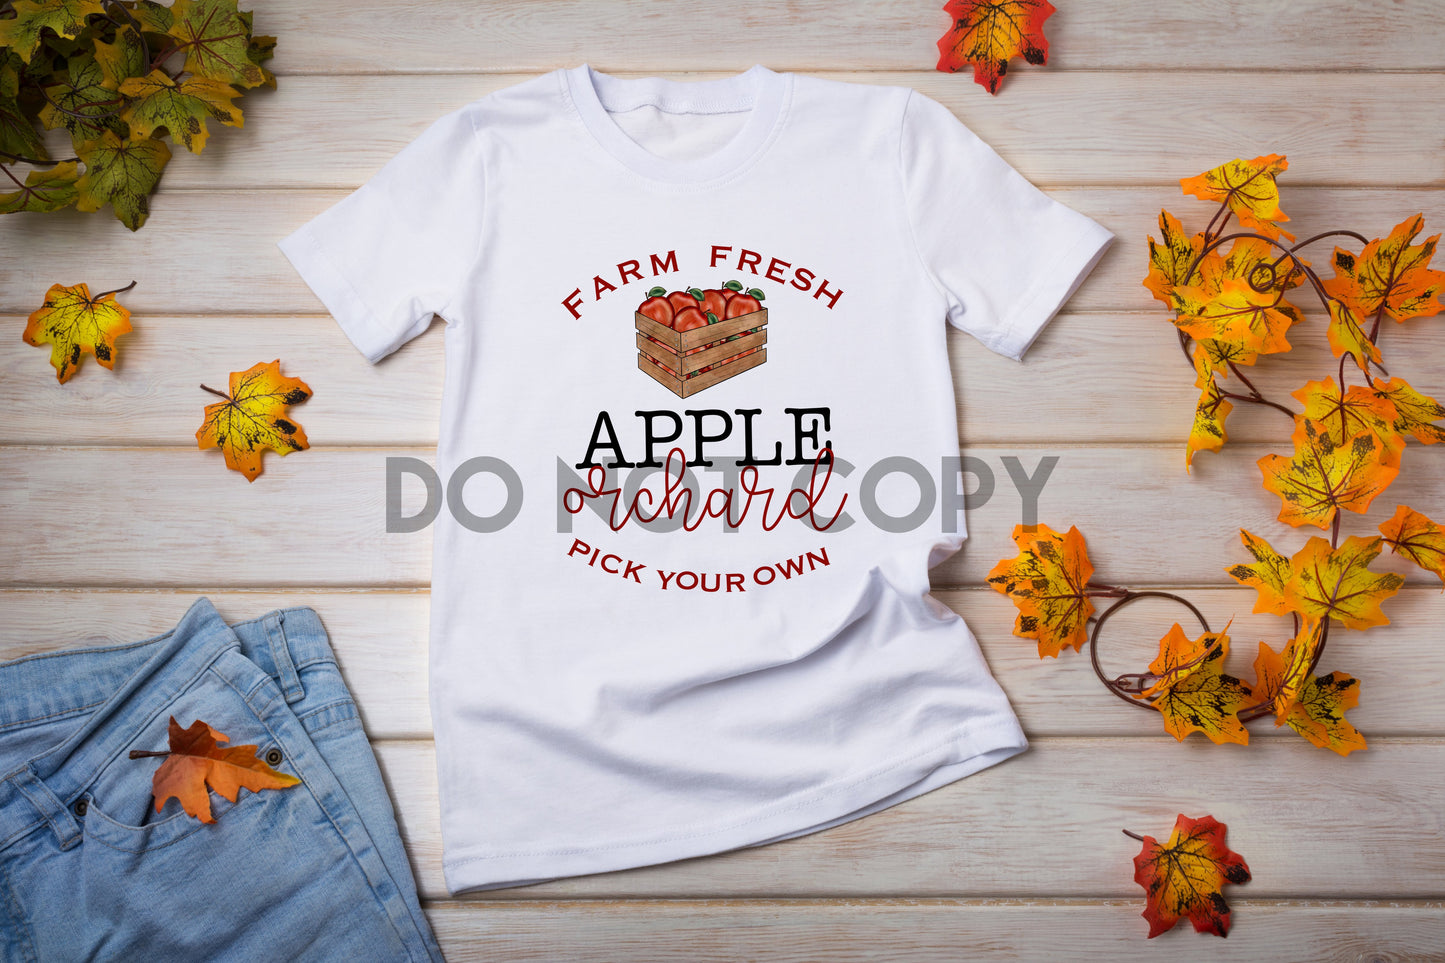 Farm Fresh Apple Orchard, Pick your own Sublimation print